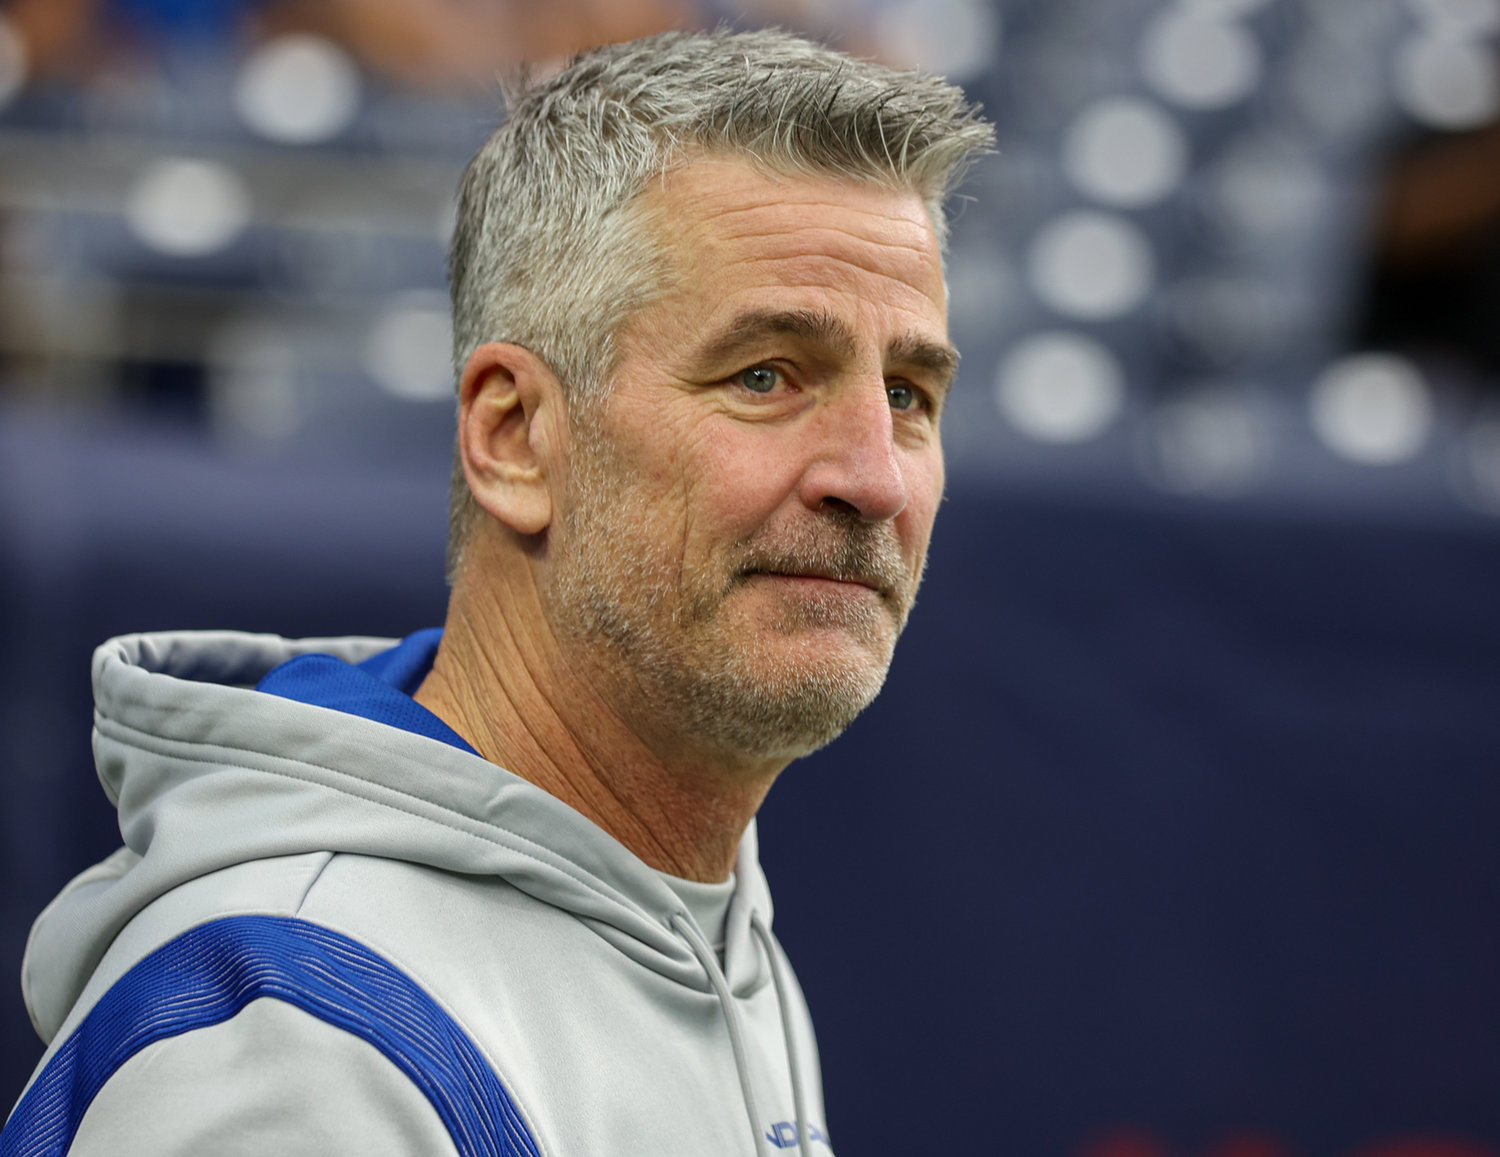 Indianapolis Colts head coach Frank Reich before the start of an NFL game between the Texans and the Colts on December 5, 2021 in Houston, Texas.